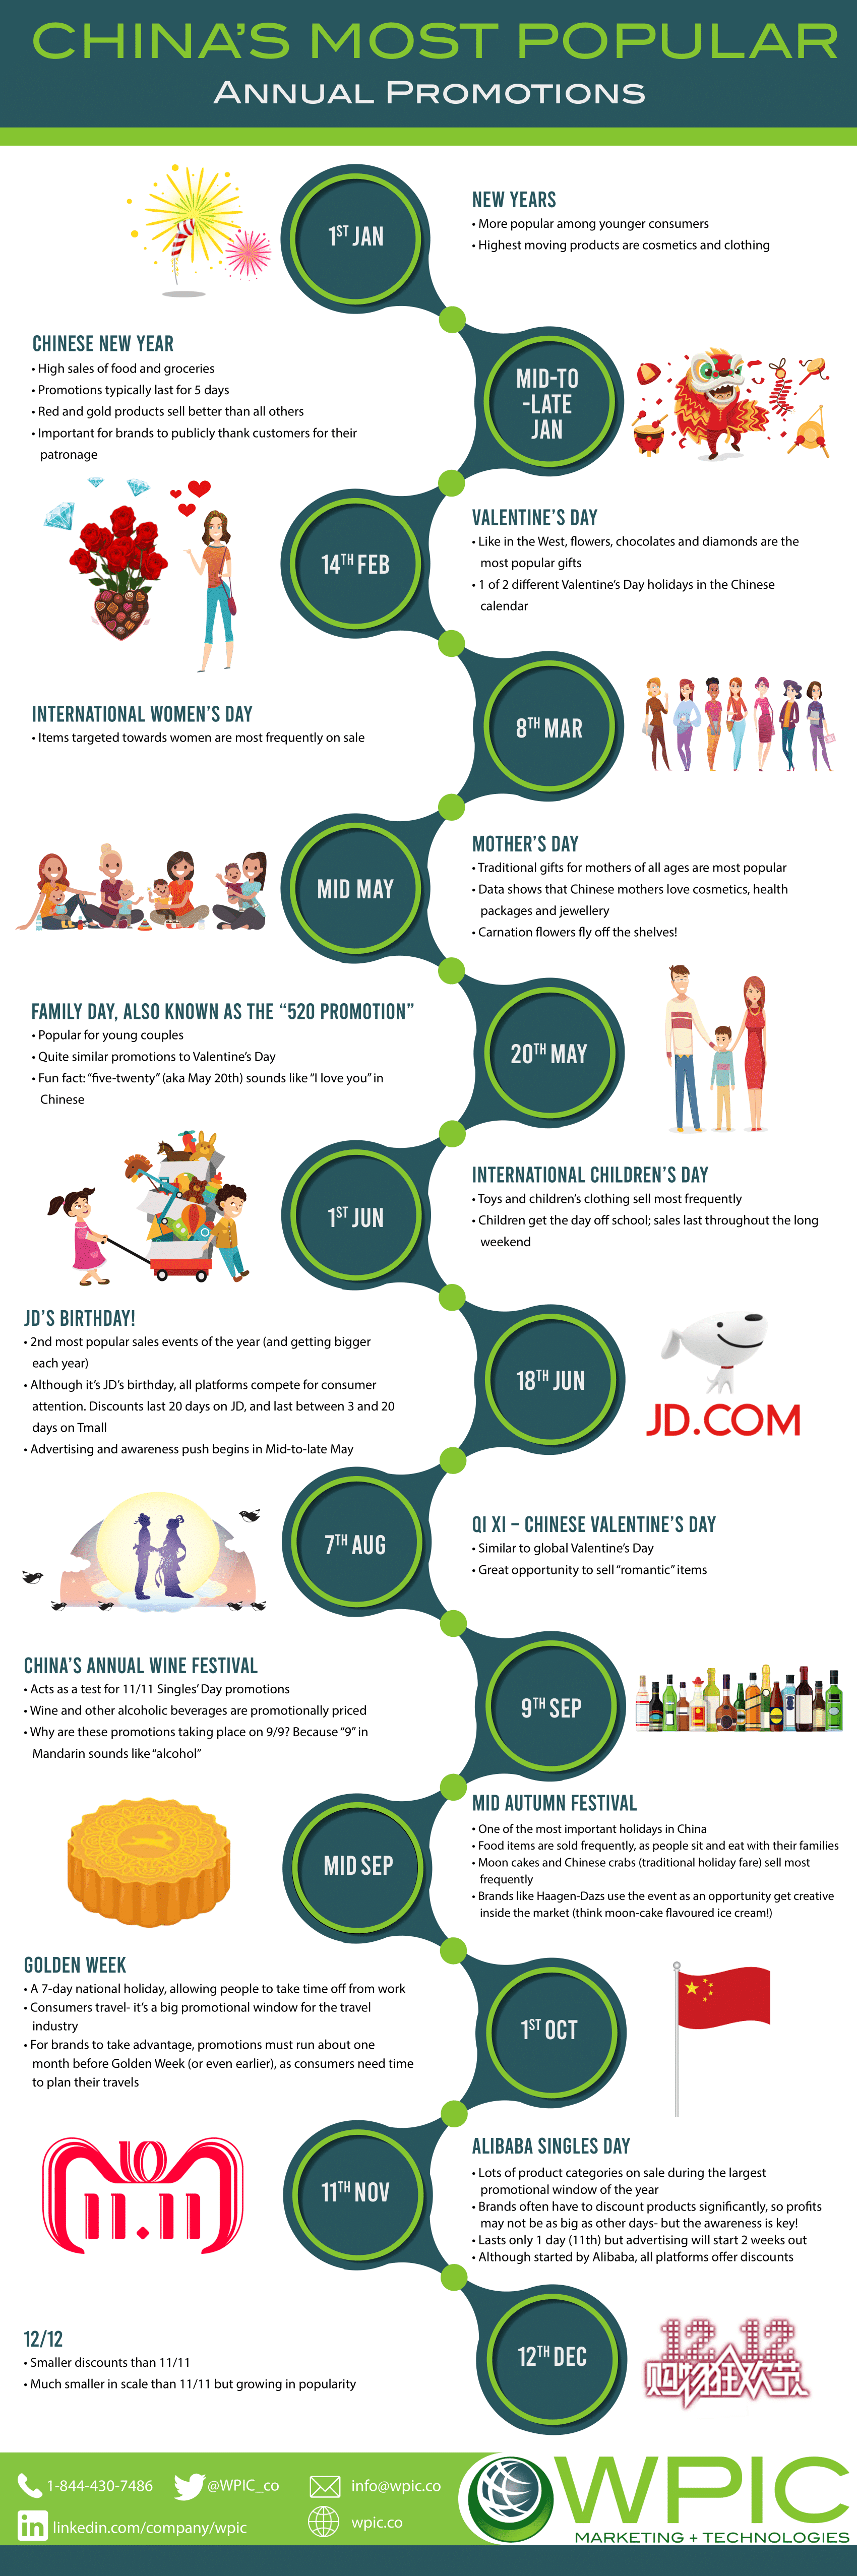 China's most popular annual promotions infographic